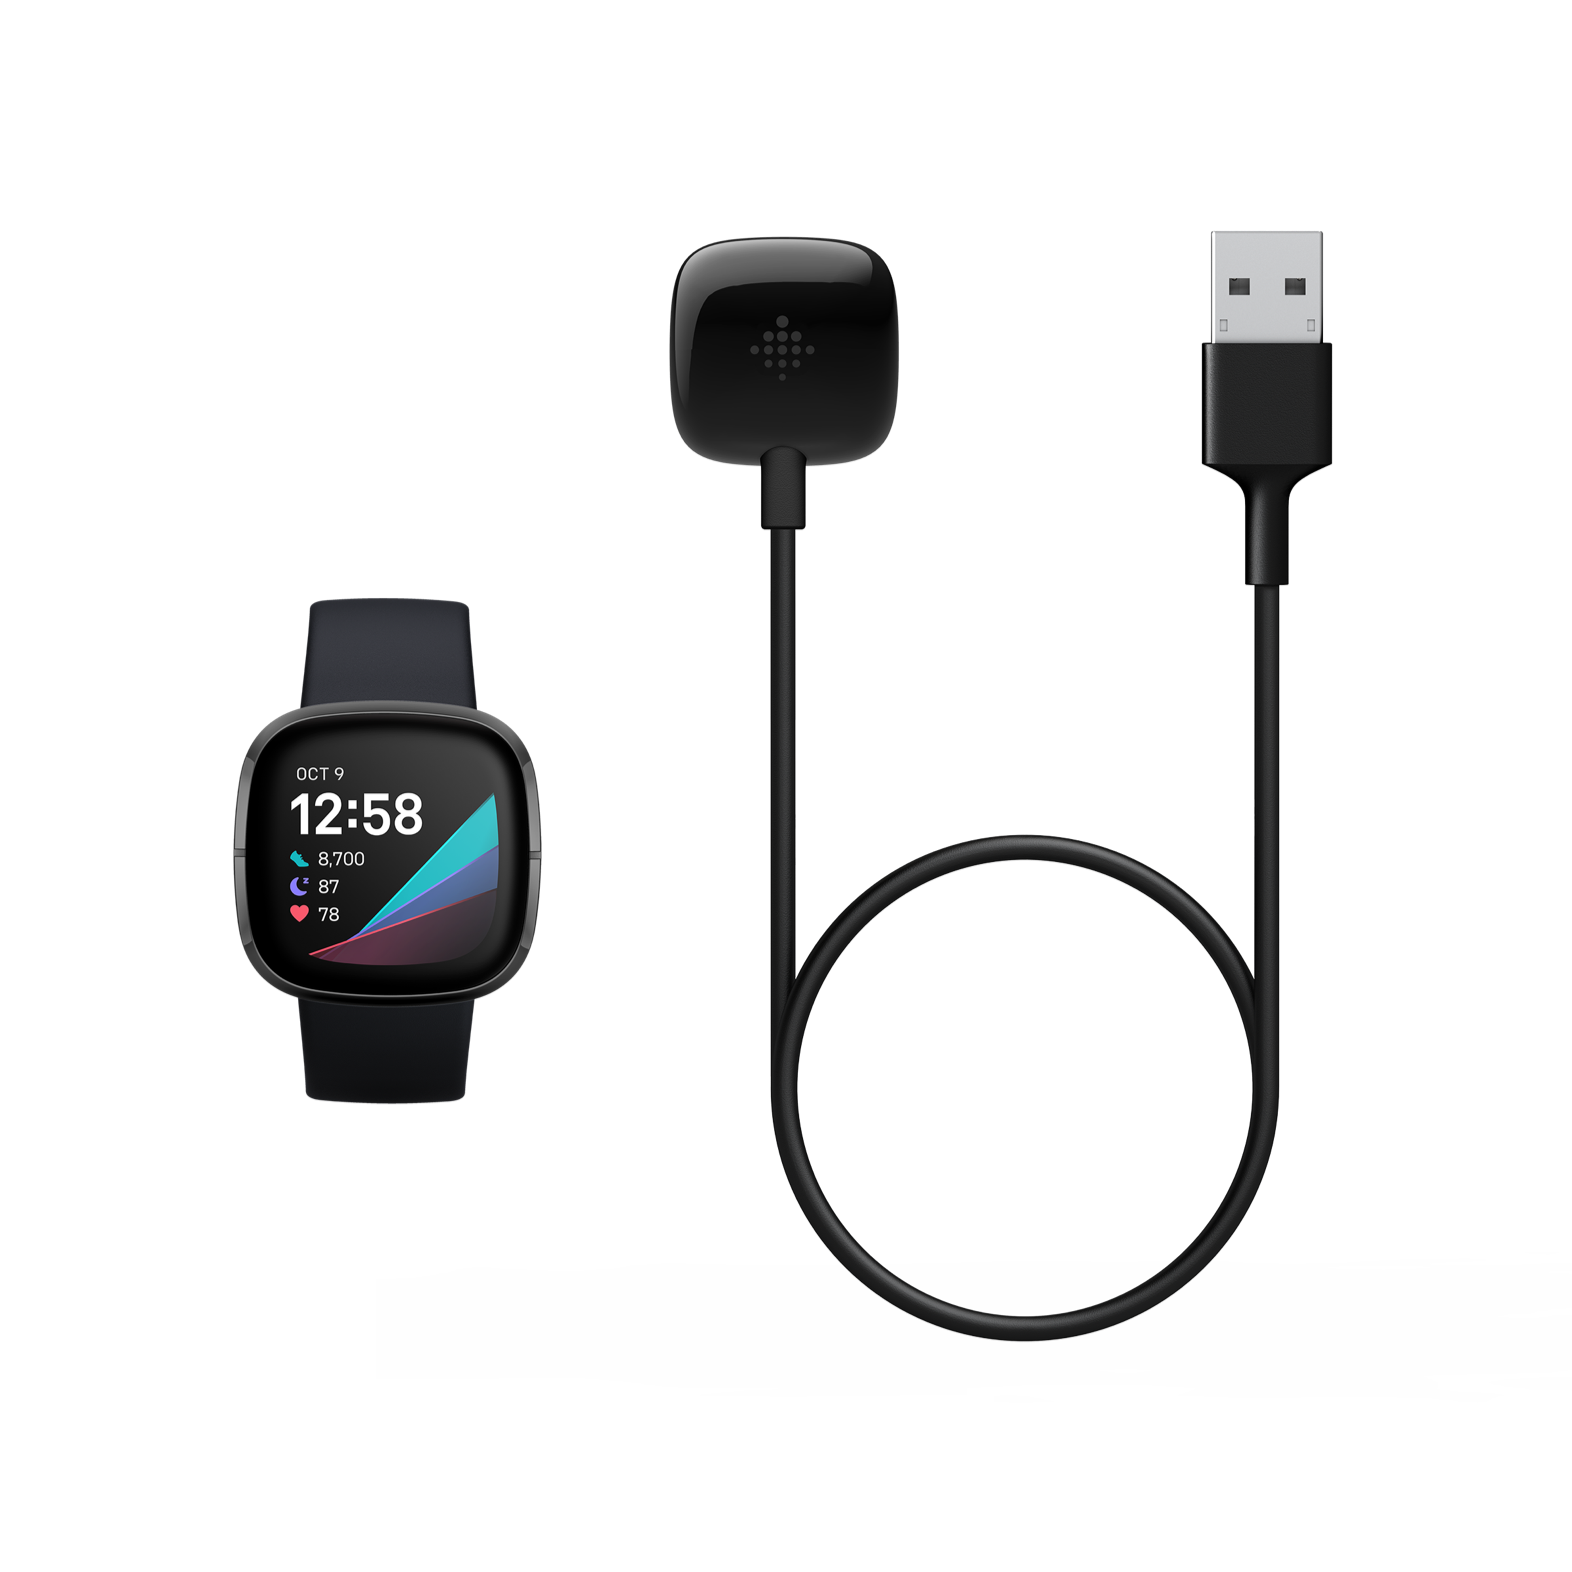 Fitbit Versa Charging Cable 